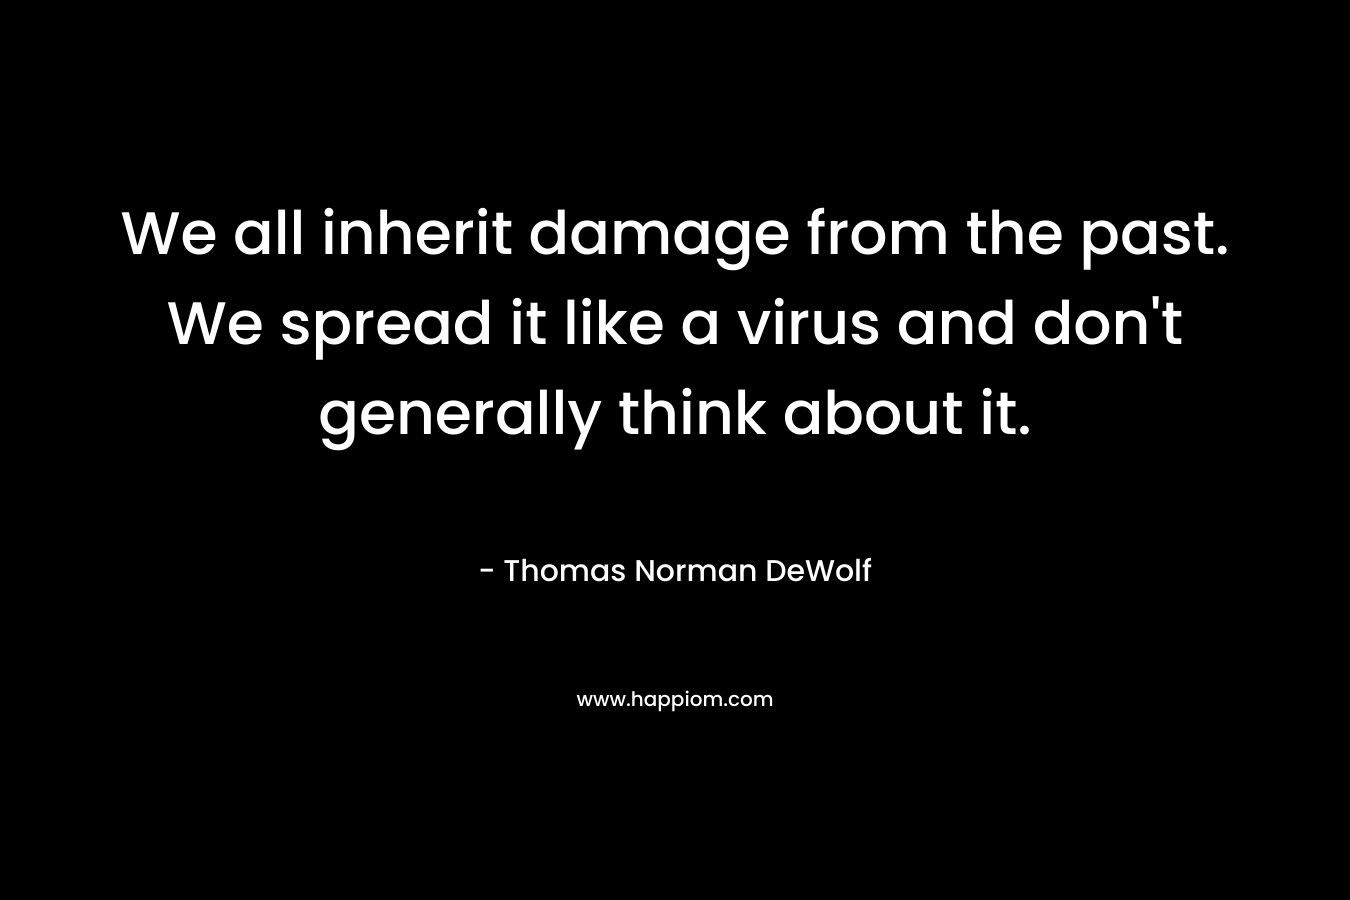 We all inherit damage from the past. We spread it like a virus and don’t generally think about it. – Thomas Norman DeWolf